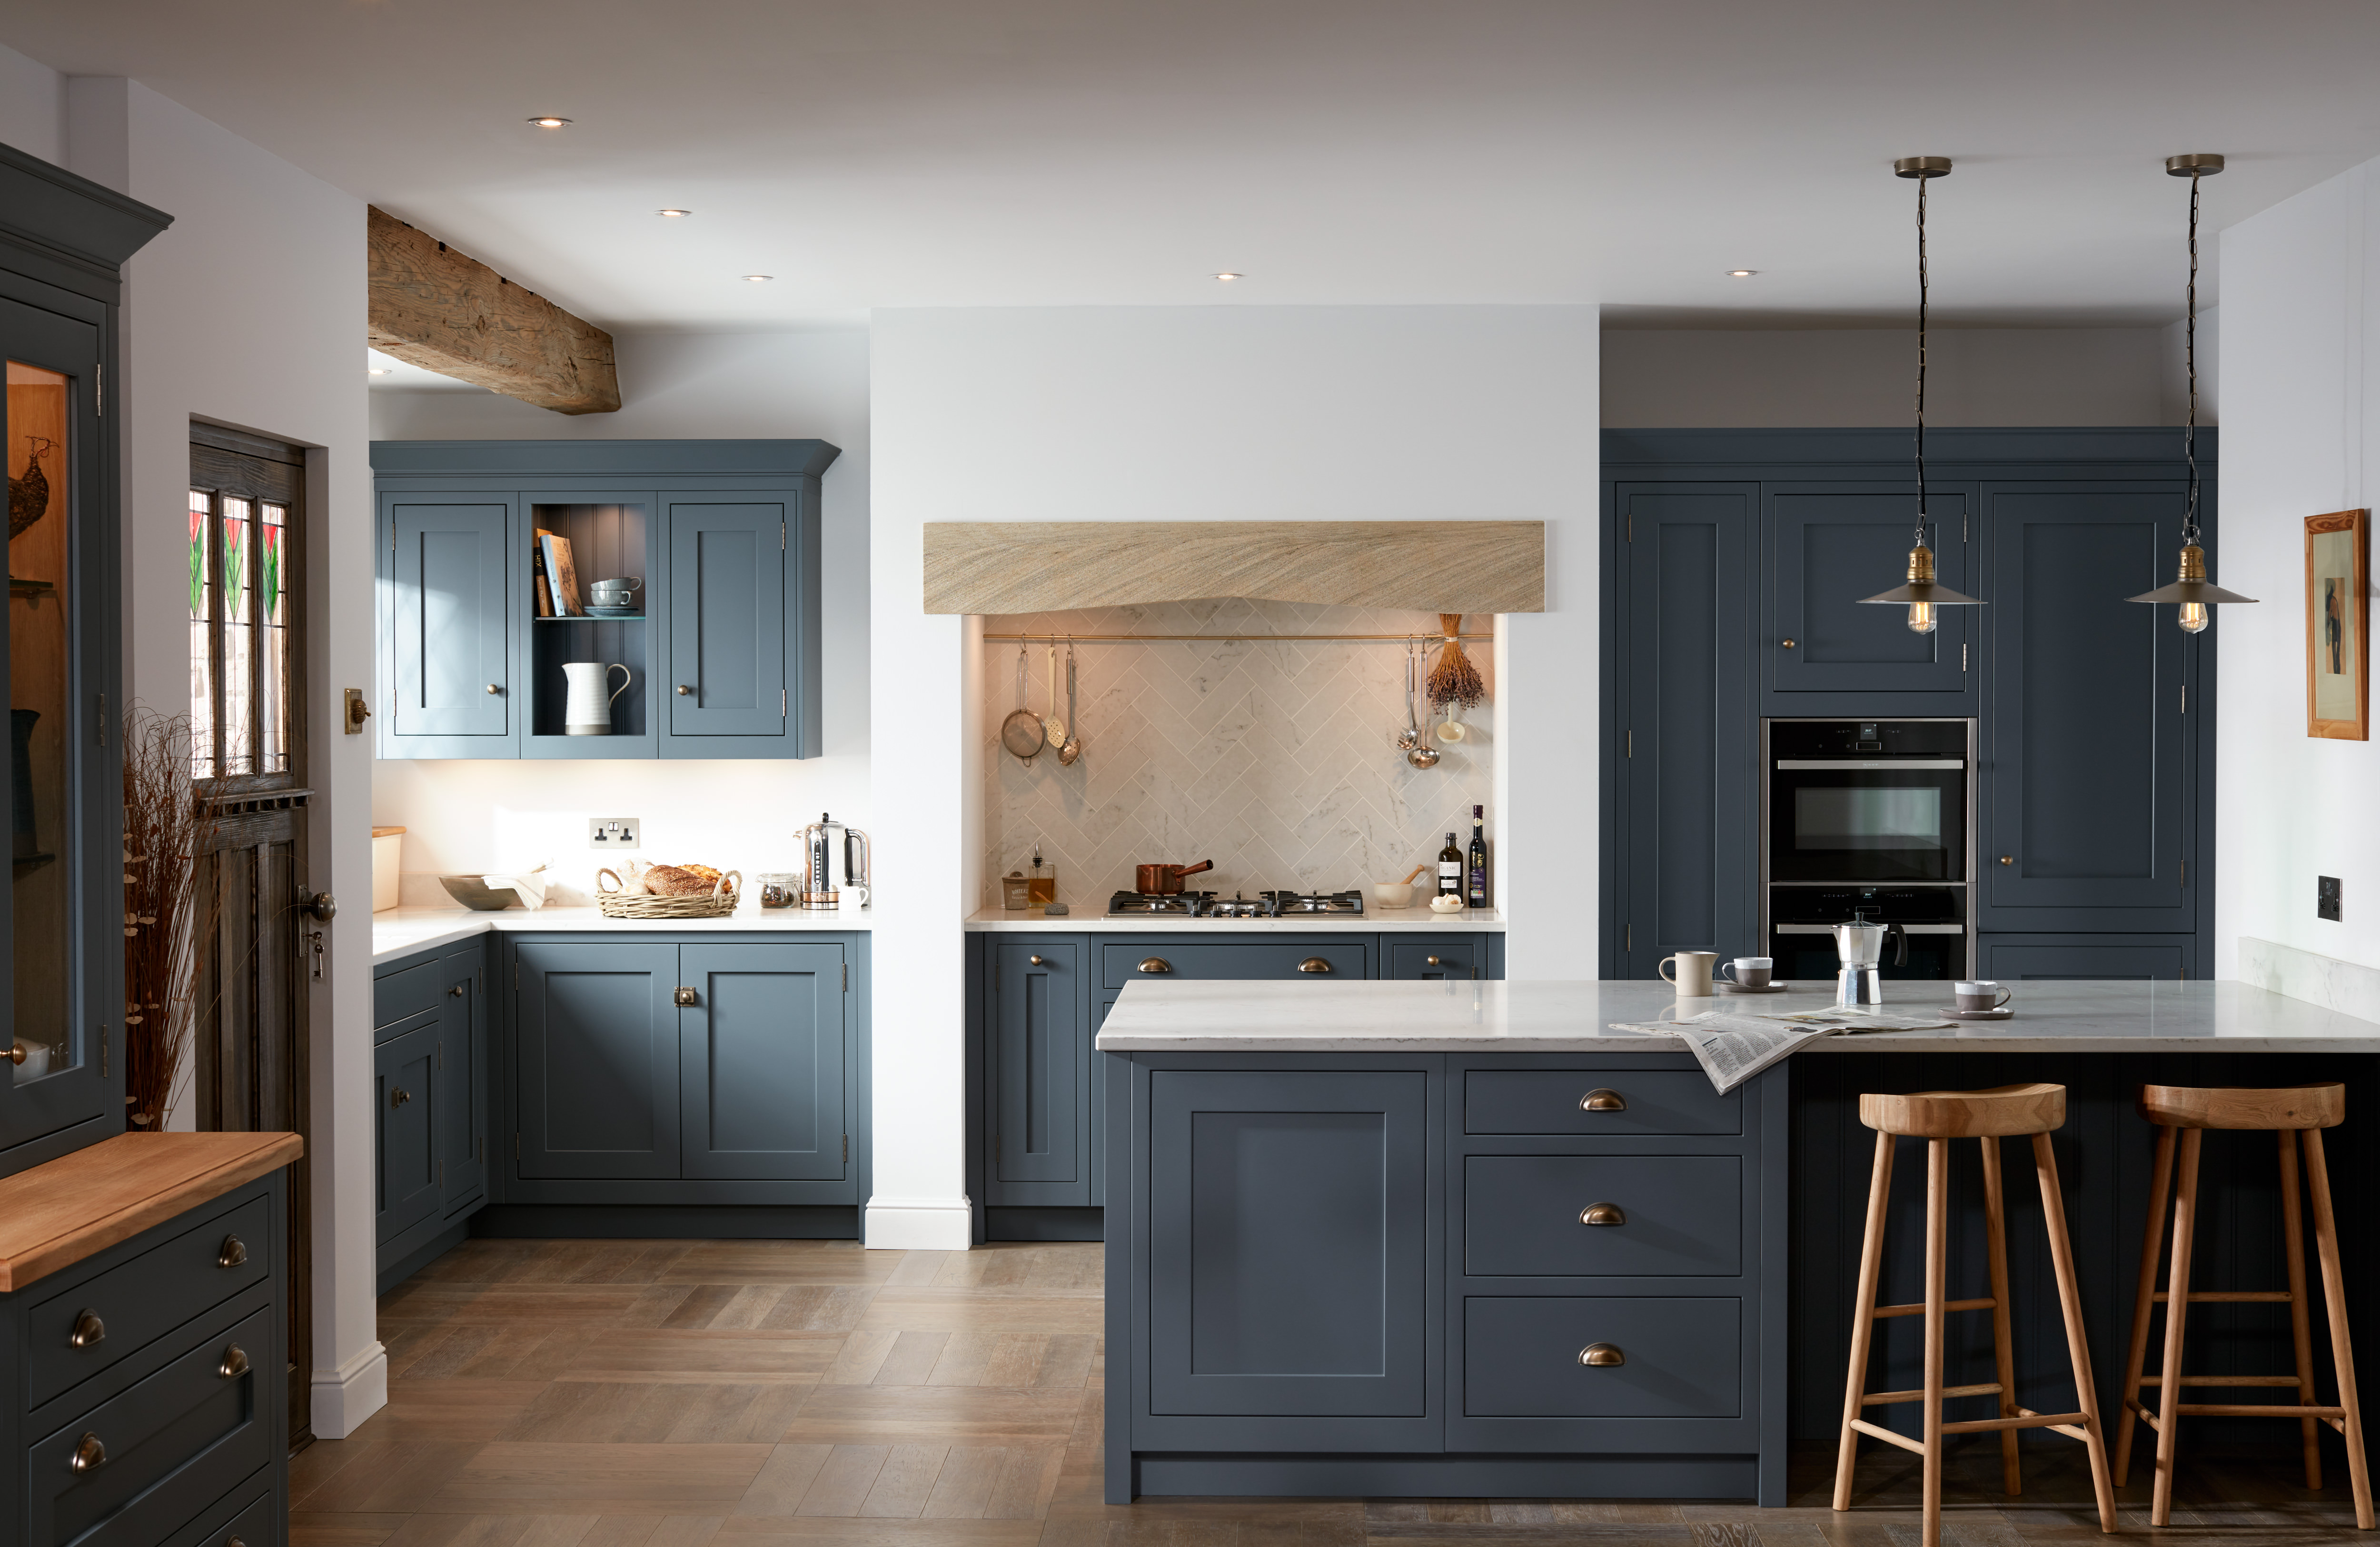 A modern Shaker kitchen in cadet blue, with a kitchen island/breakfast bar and wooden flooring.